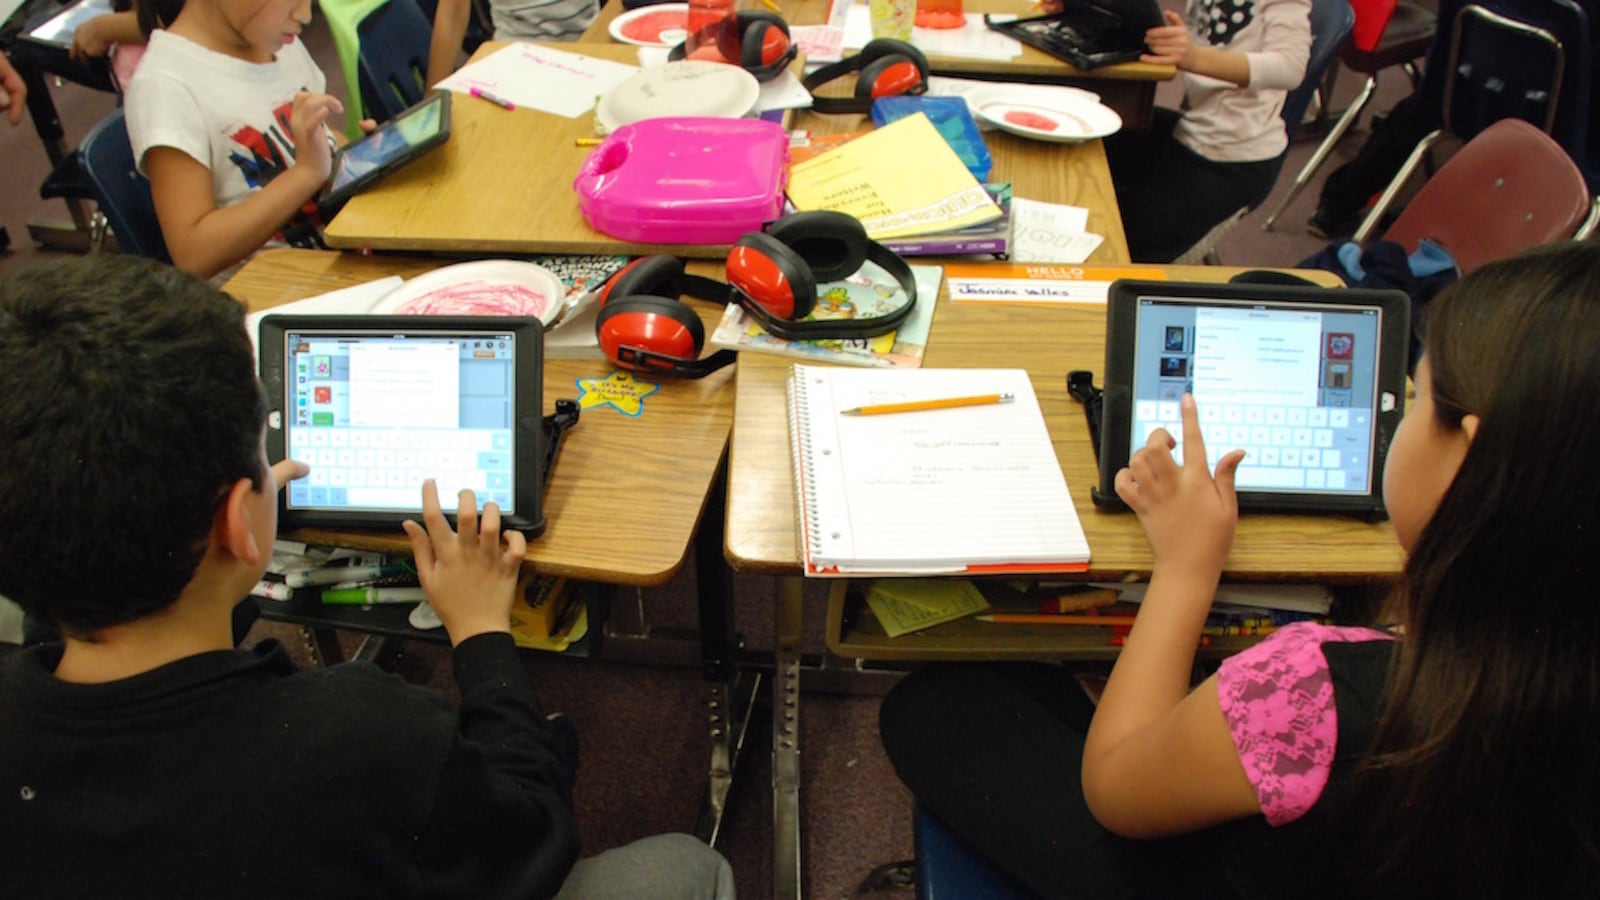 Students at Edgewater Elementary School in Jefferson County work on iPads during class.